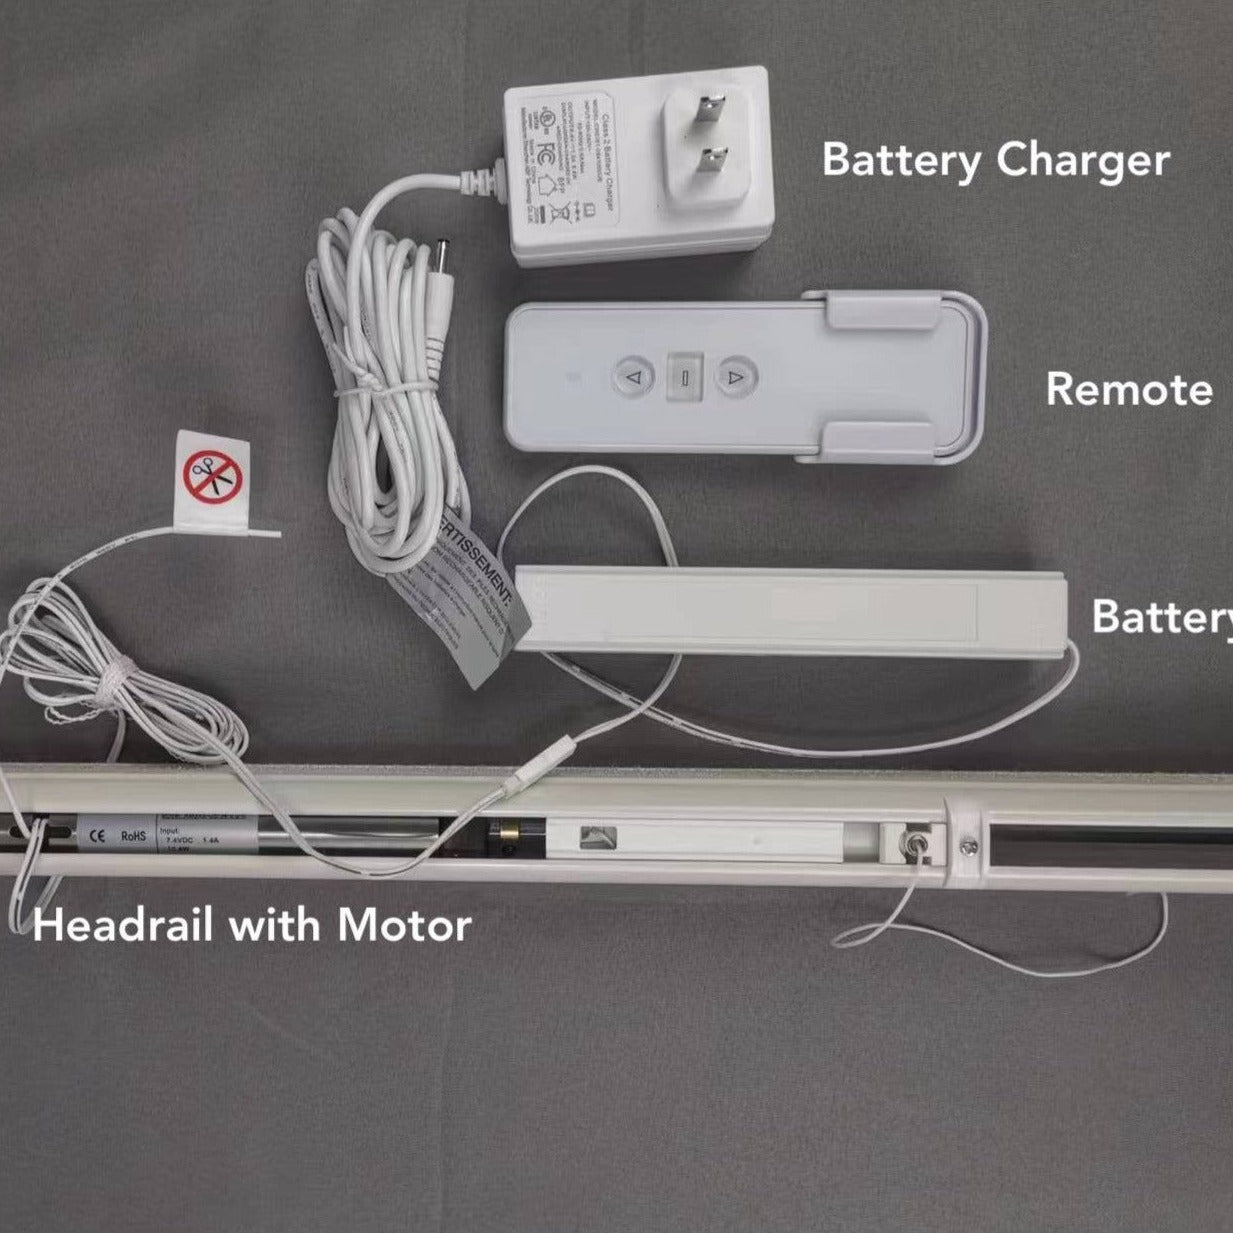 Motorized Upgrade, Cordless Remote Control Mechanism, Safety Blinds System